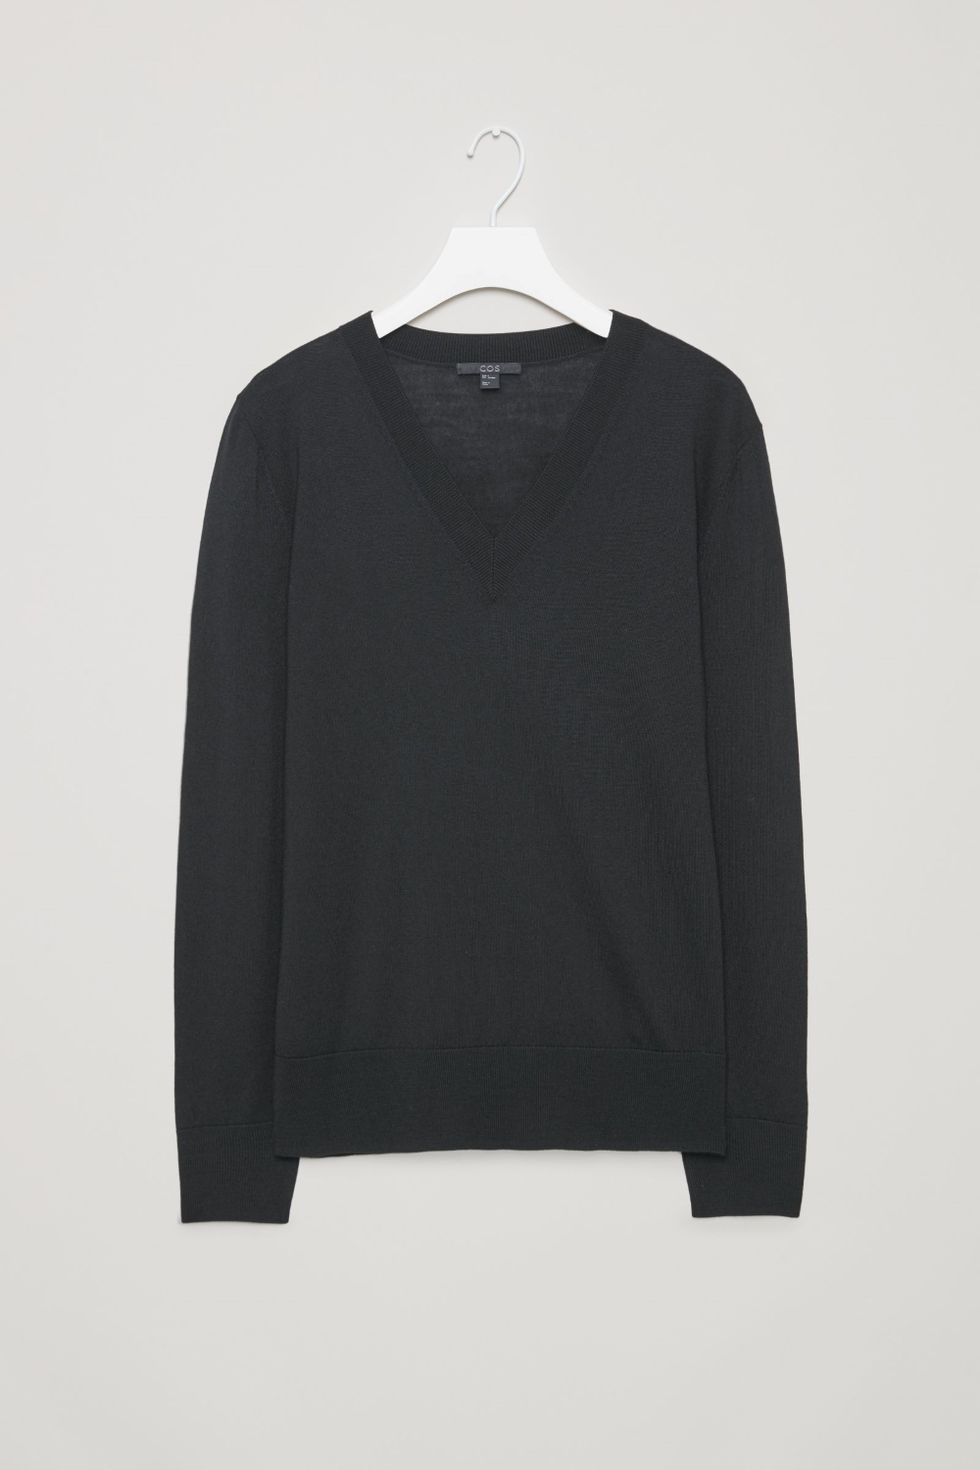 Clothing, Black, Sleeve, Long-sleeved t-shirt, Outerwear, Sweater, T-shirt, Top, Jersey, Neck, 